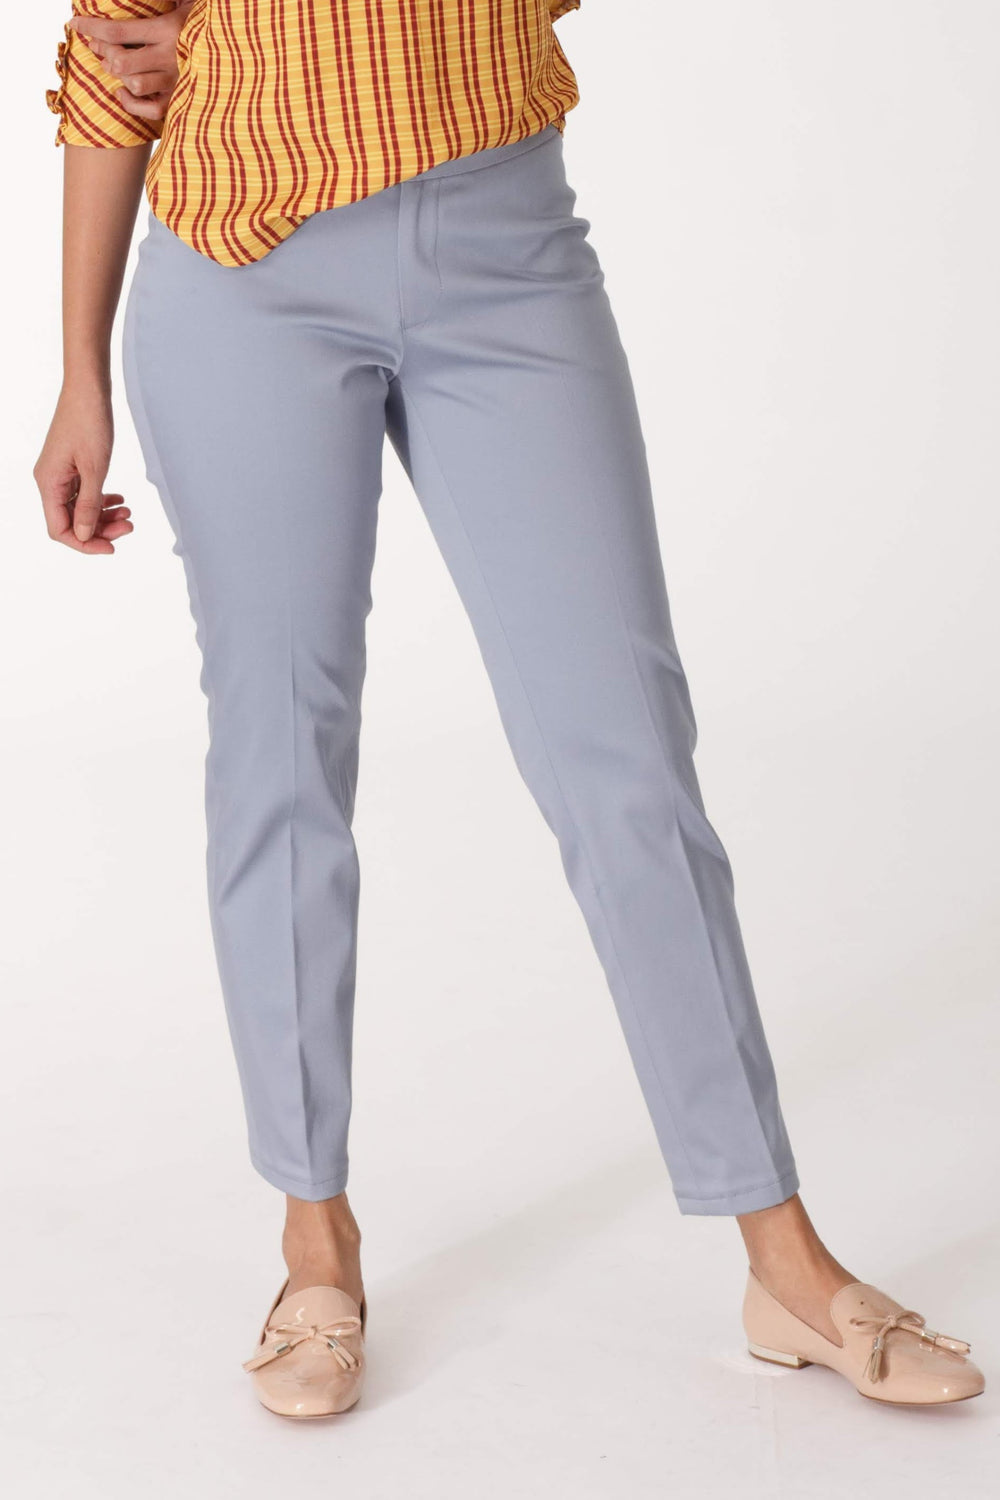 Buy Jockey Cotton Stretch Lounge Pants  Grey at Rs949 online  Activewear  online